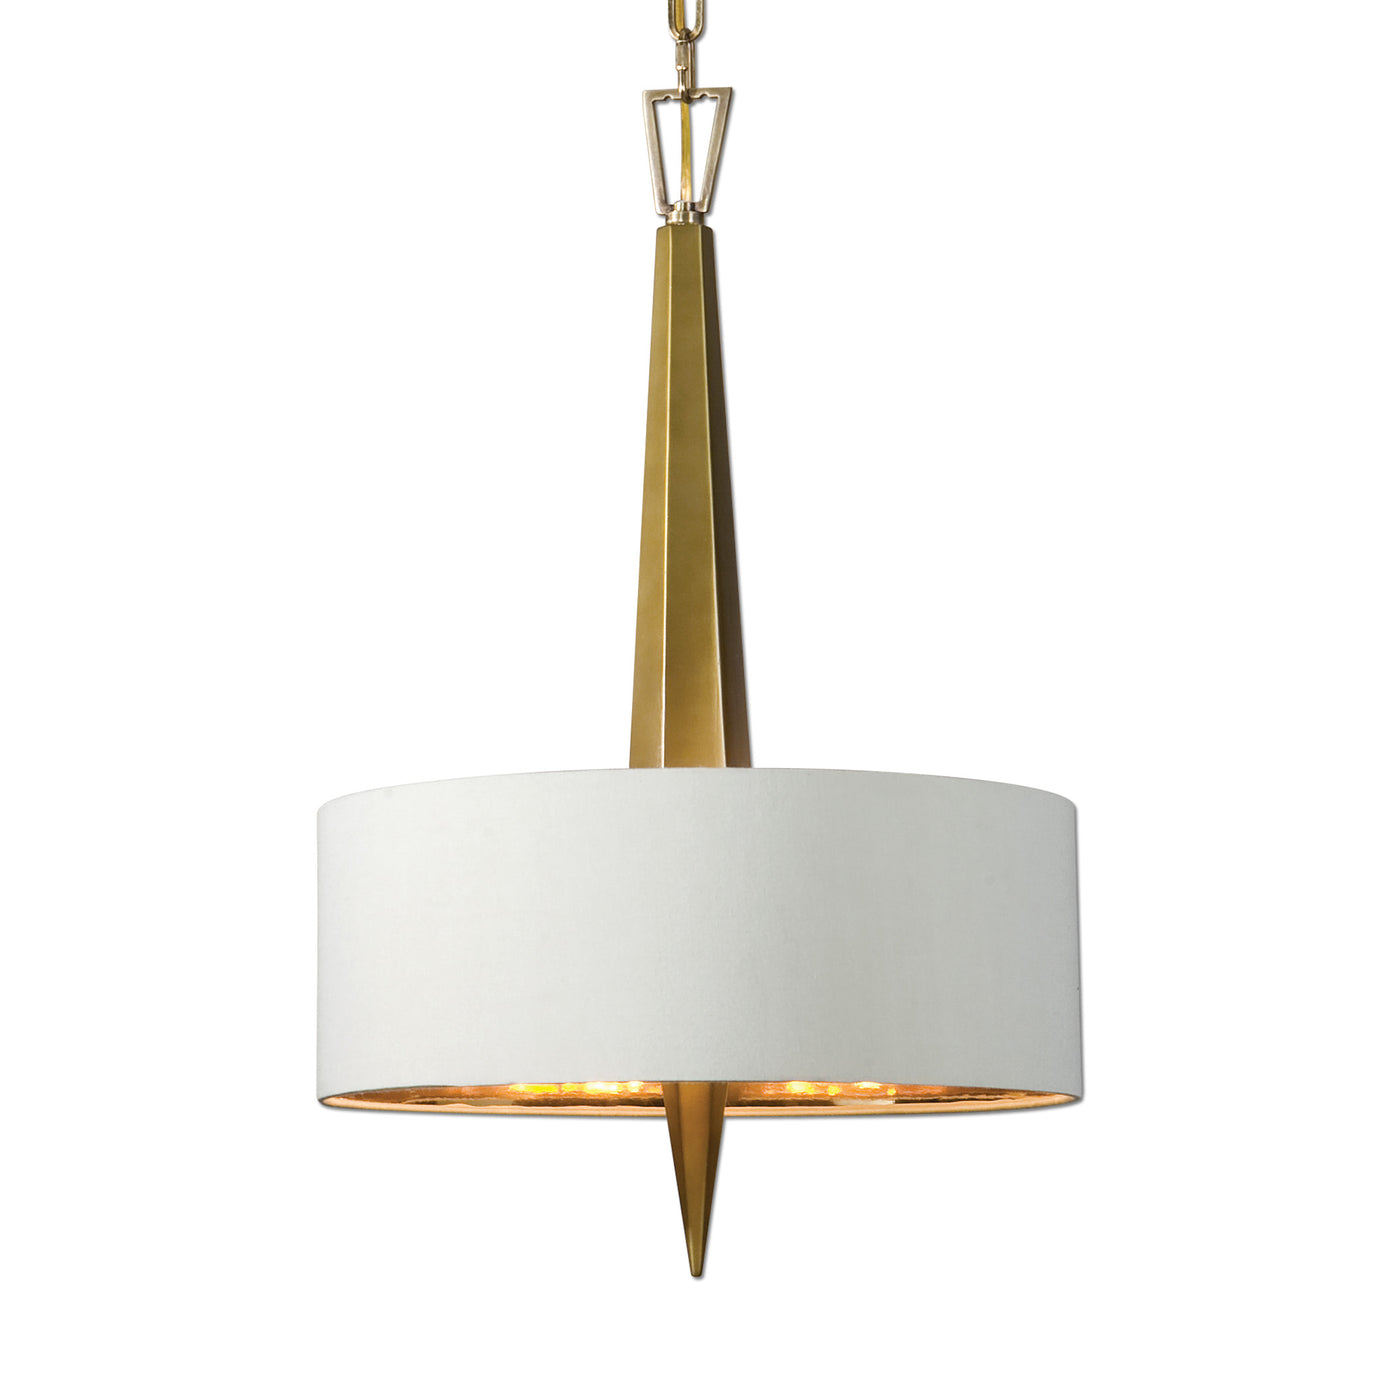 An Elegant Chandelier With A Sleek Vertical Ceramic Center In A Warm Gold Finish Evokes An Art Deco Feeling With A Beige L...